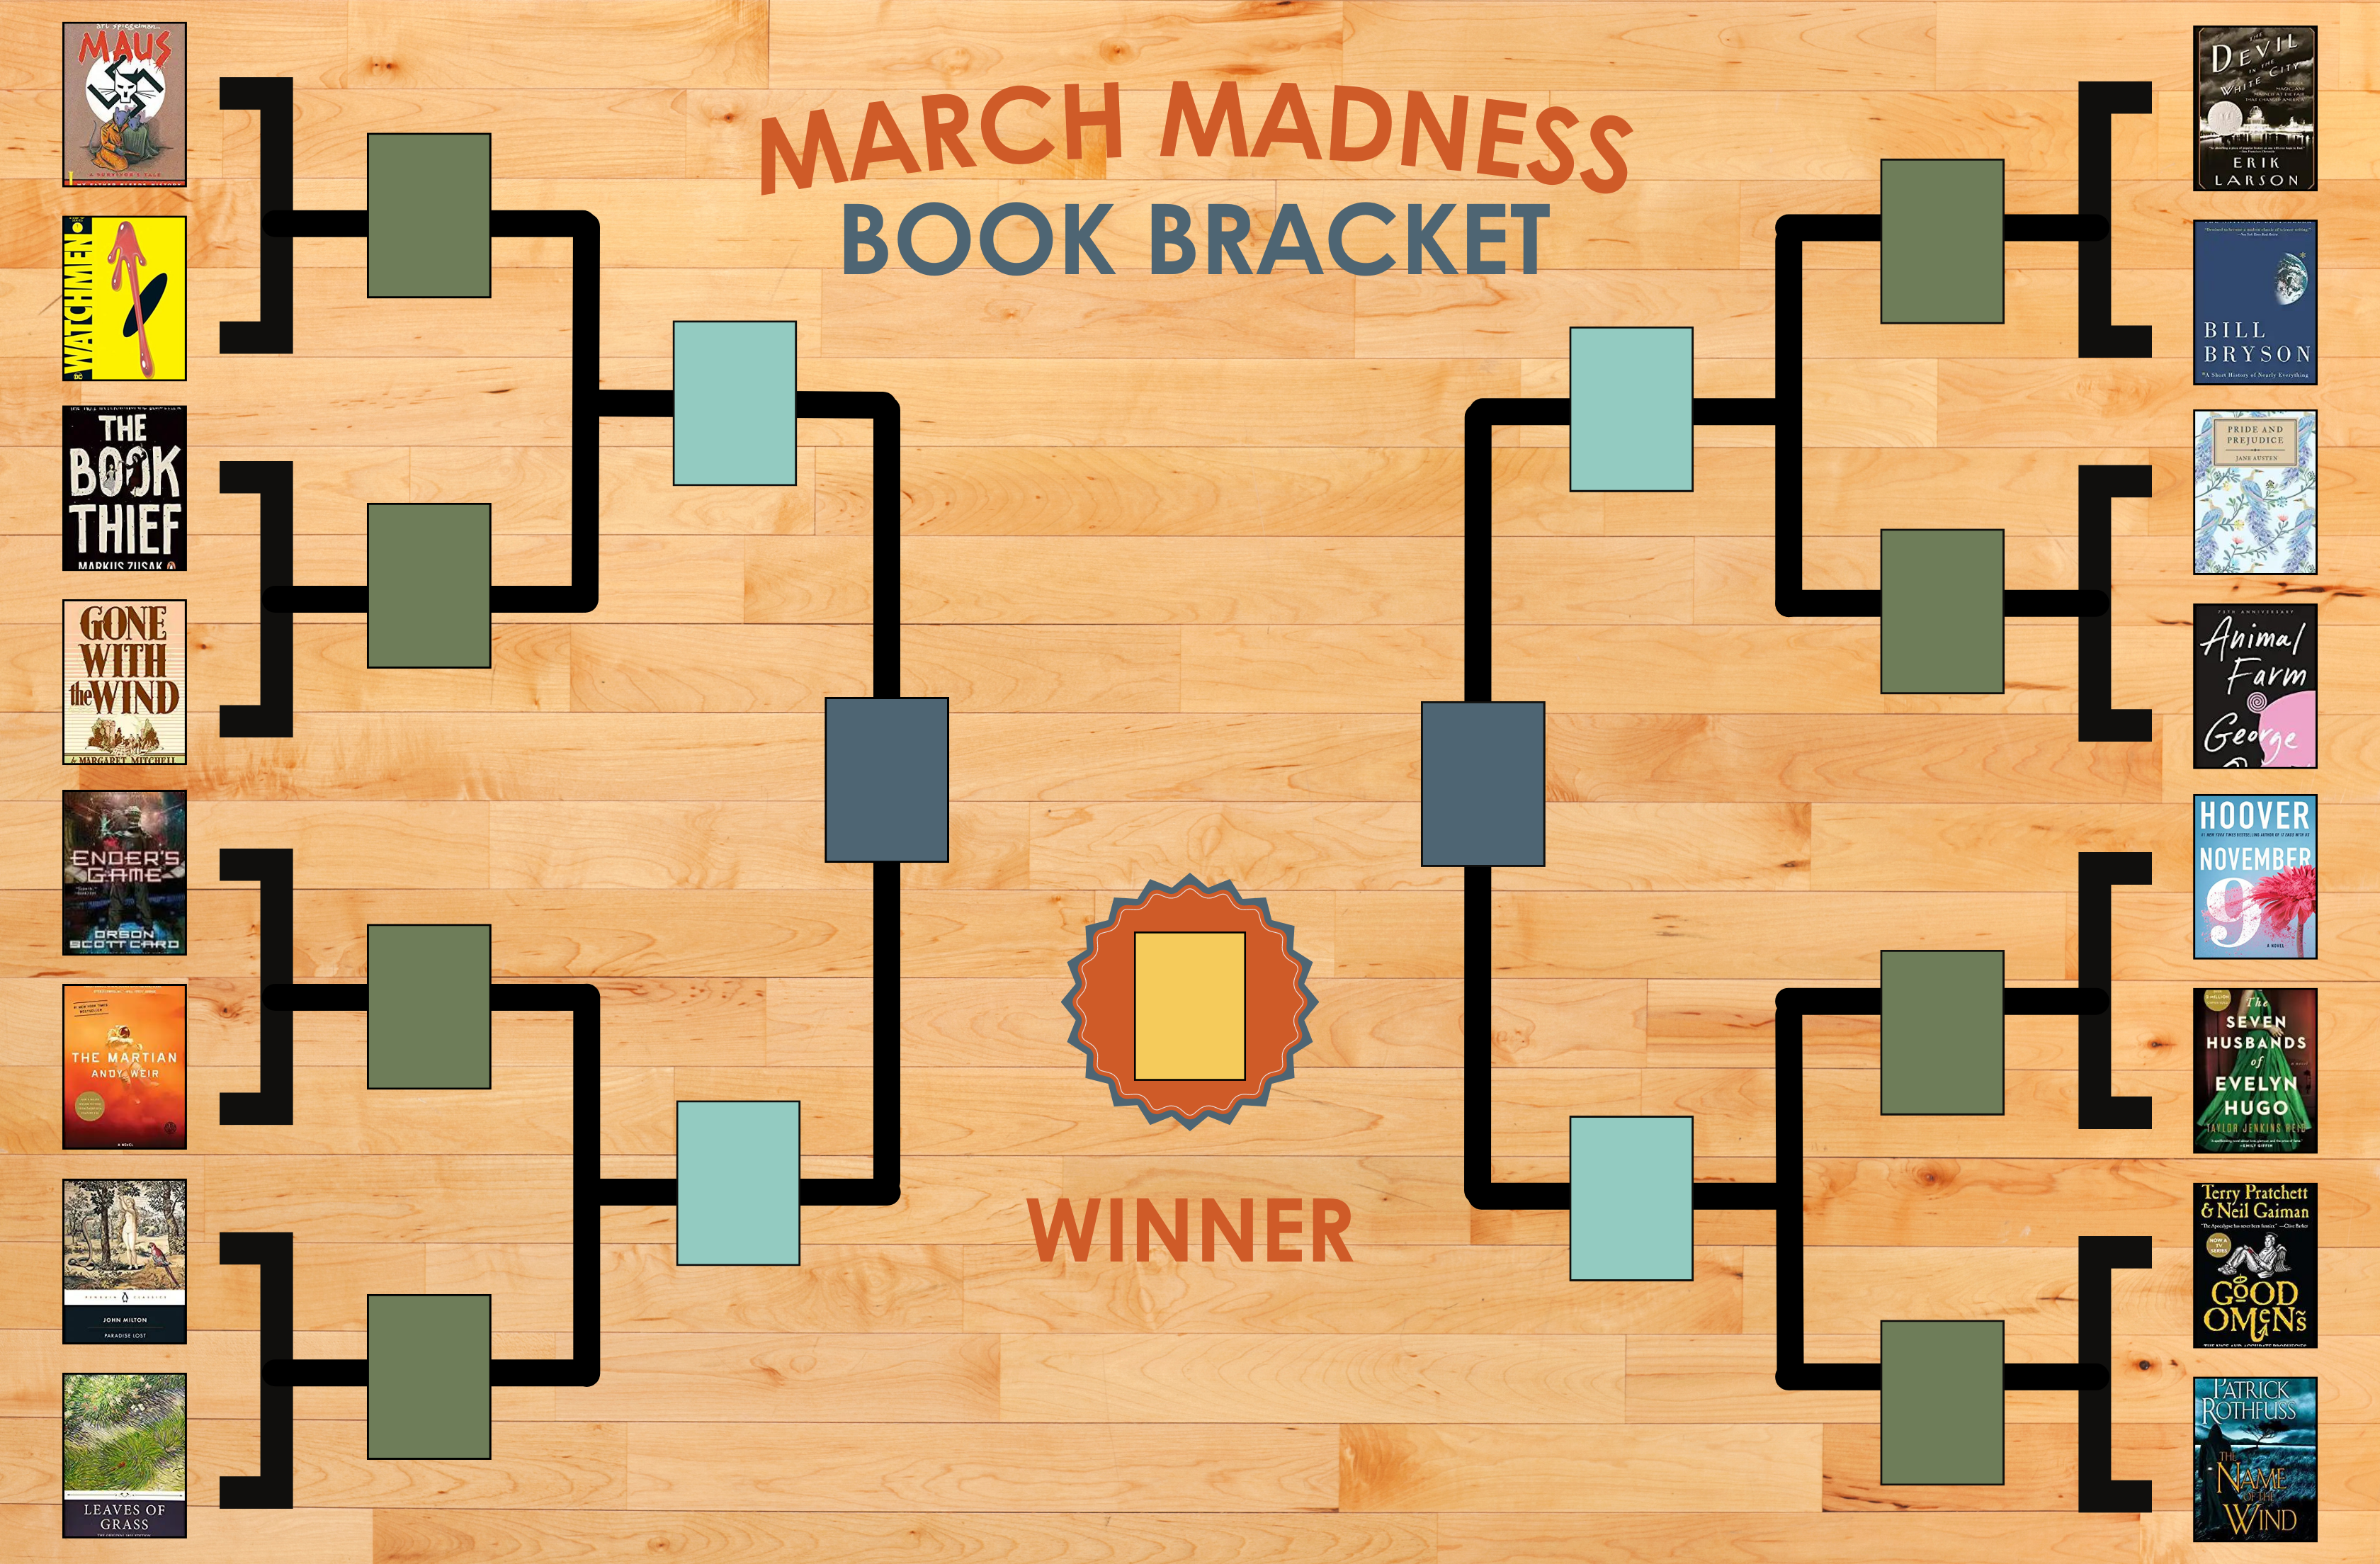 Graphic depiction of Book Bracket using the book covers.